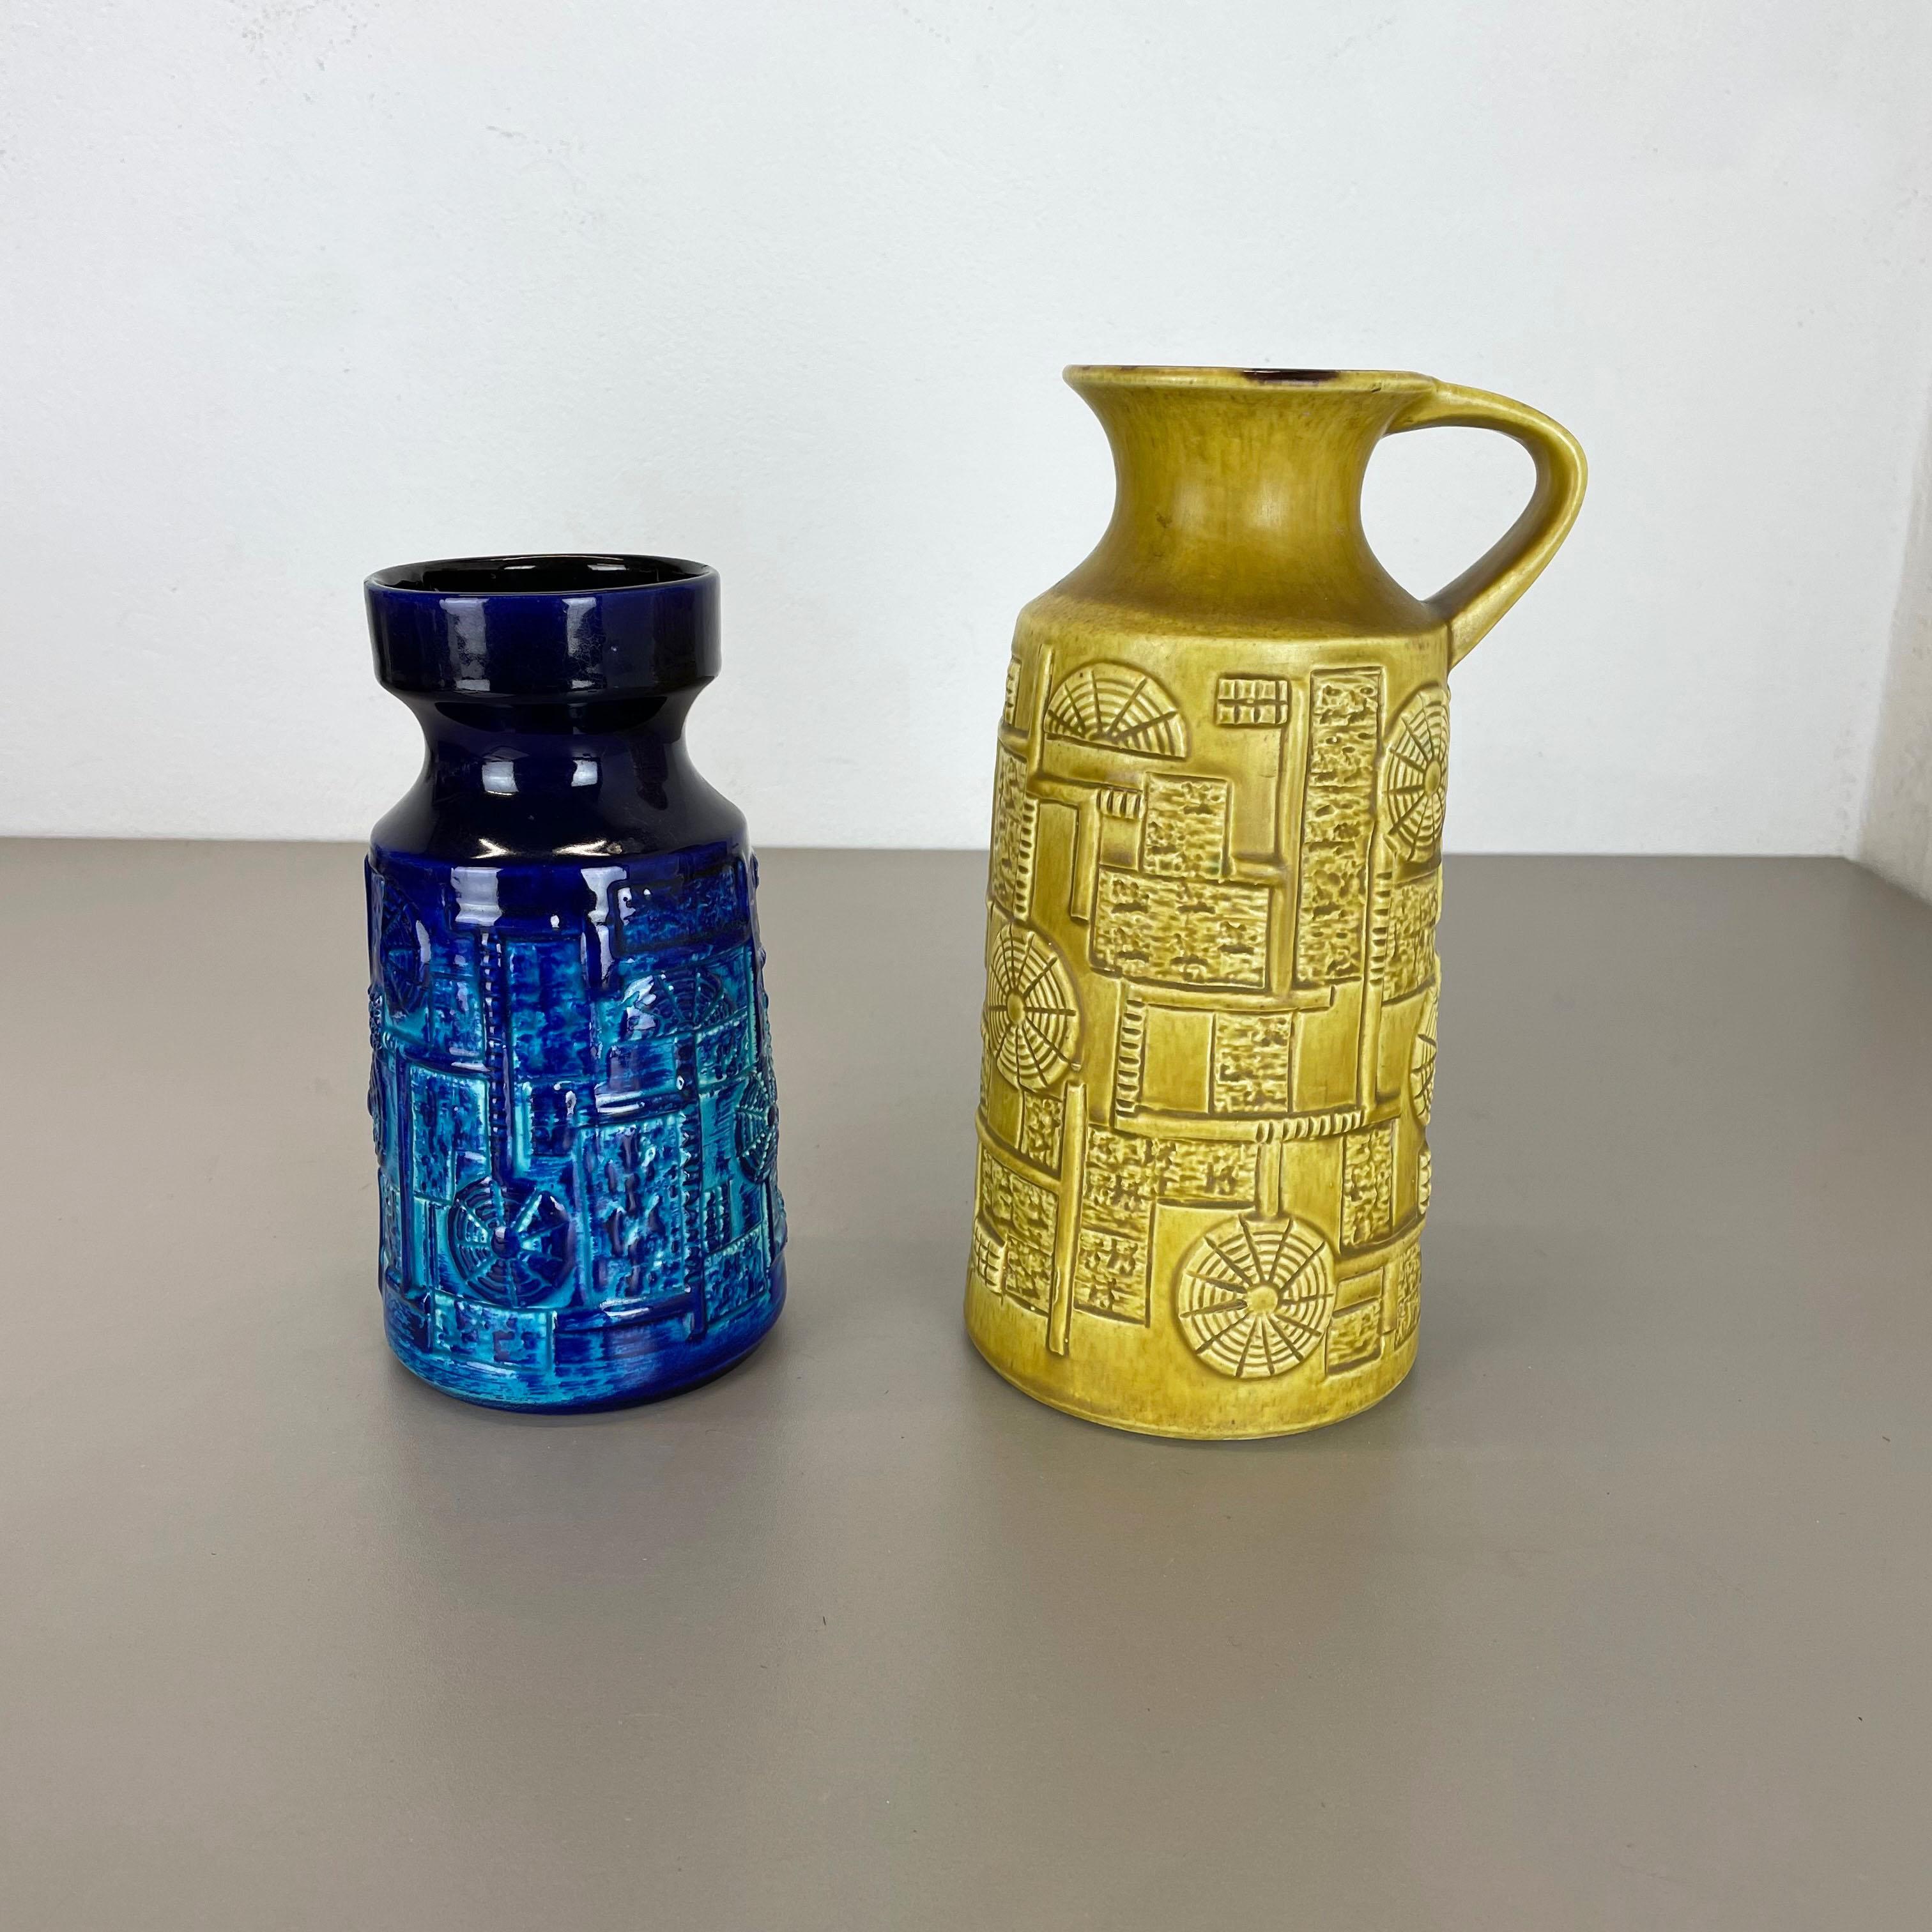 Article:

Pottery ceramic vase set of 2


Producer:

BAY Ceramic, Germany


Decade:

1970s



Description:

Set of 2 original vintage 1970s pottery ceramic vase made in Germany. High quality German production with a nice abstract